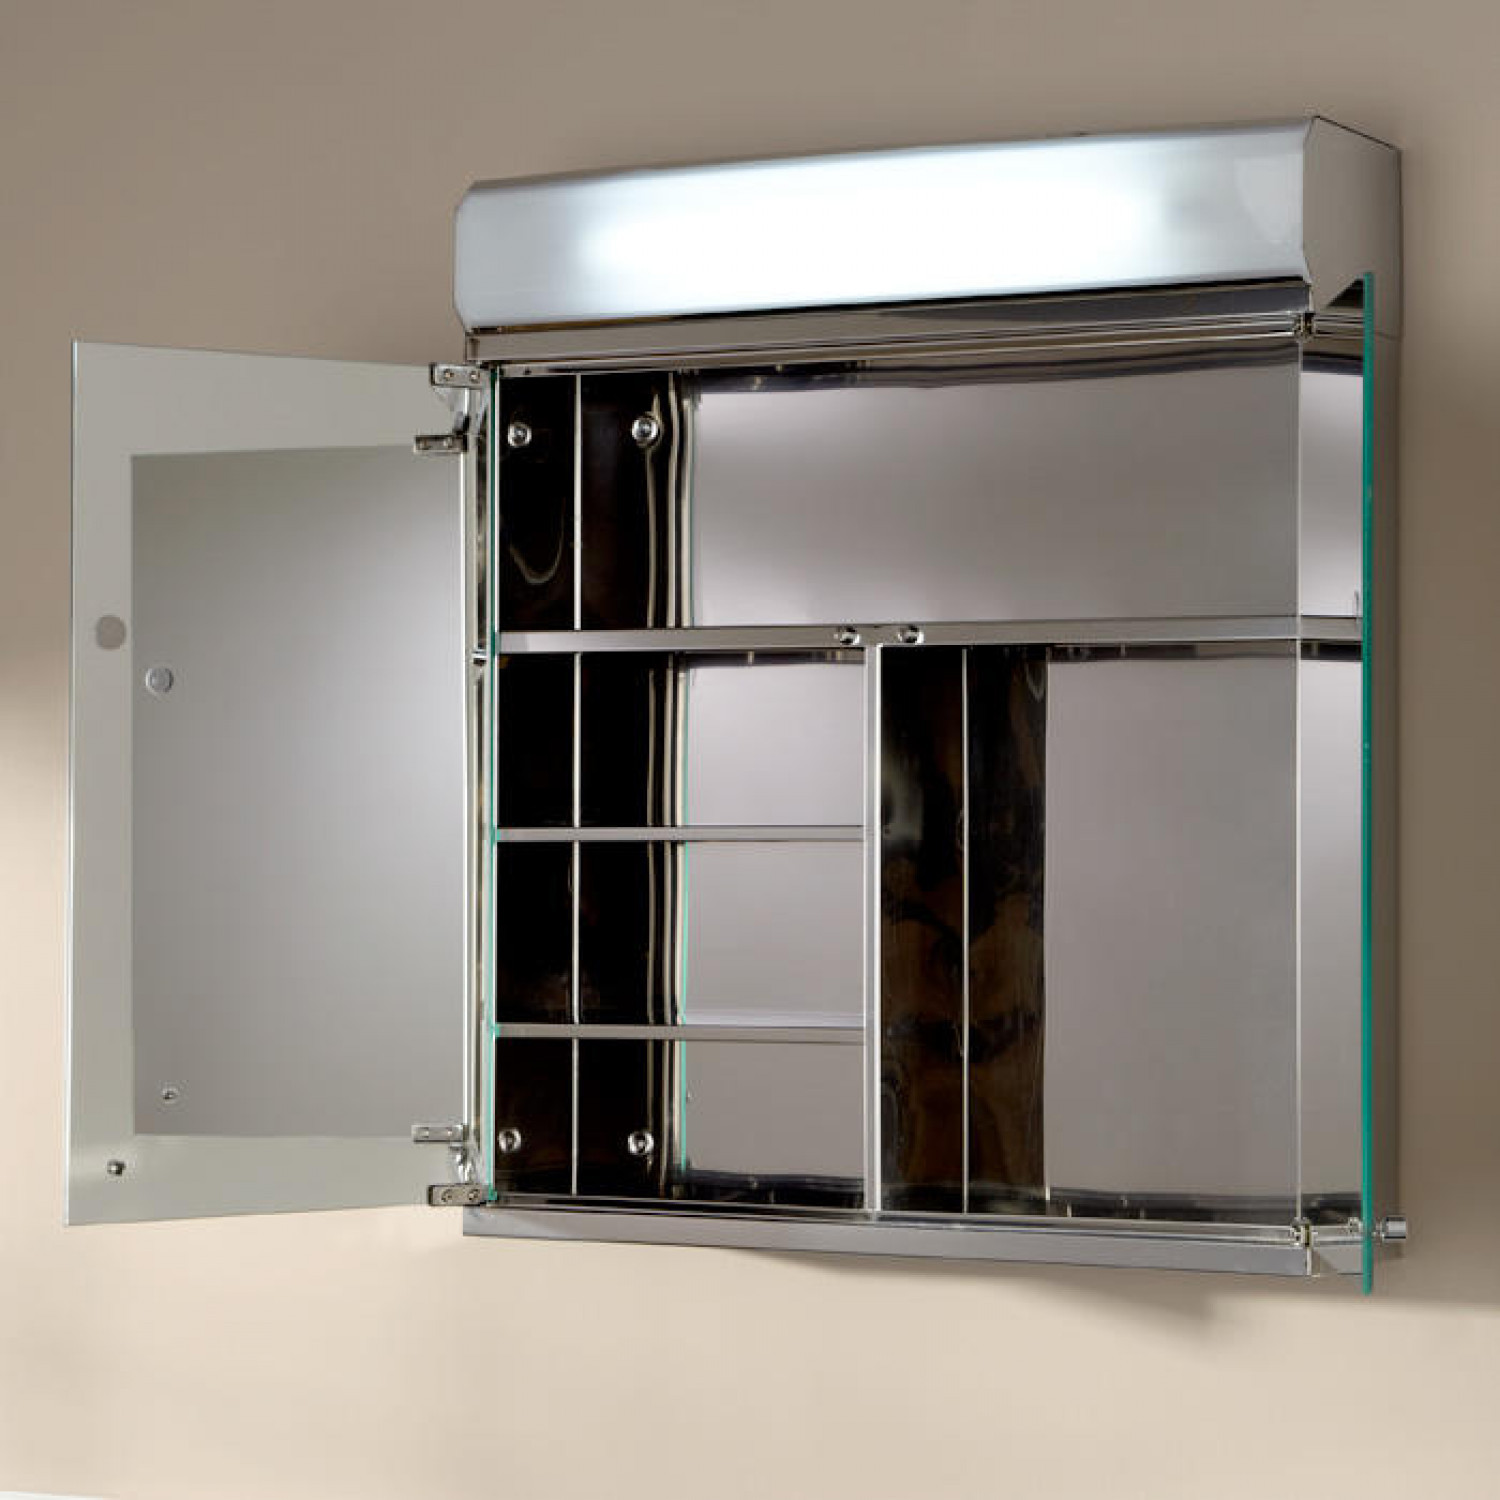 Bathroom Mirror Cabinet With Light
 Delview Stainless Steel Medicine Cabinet with Lighted